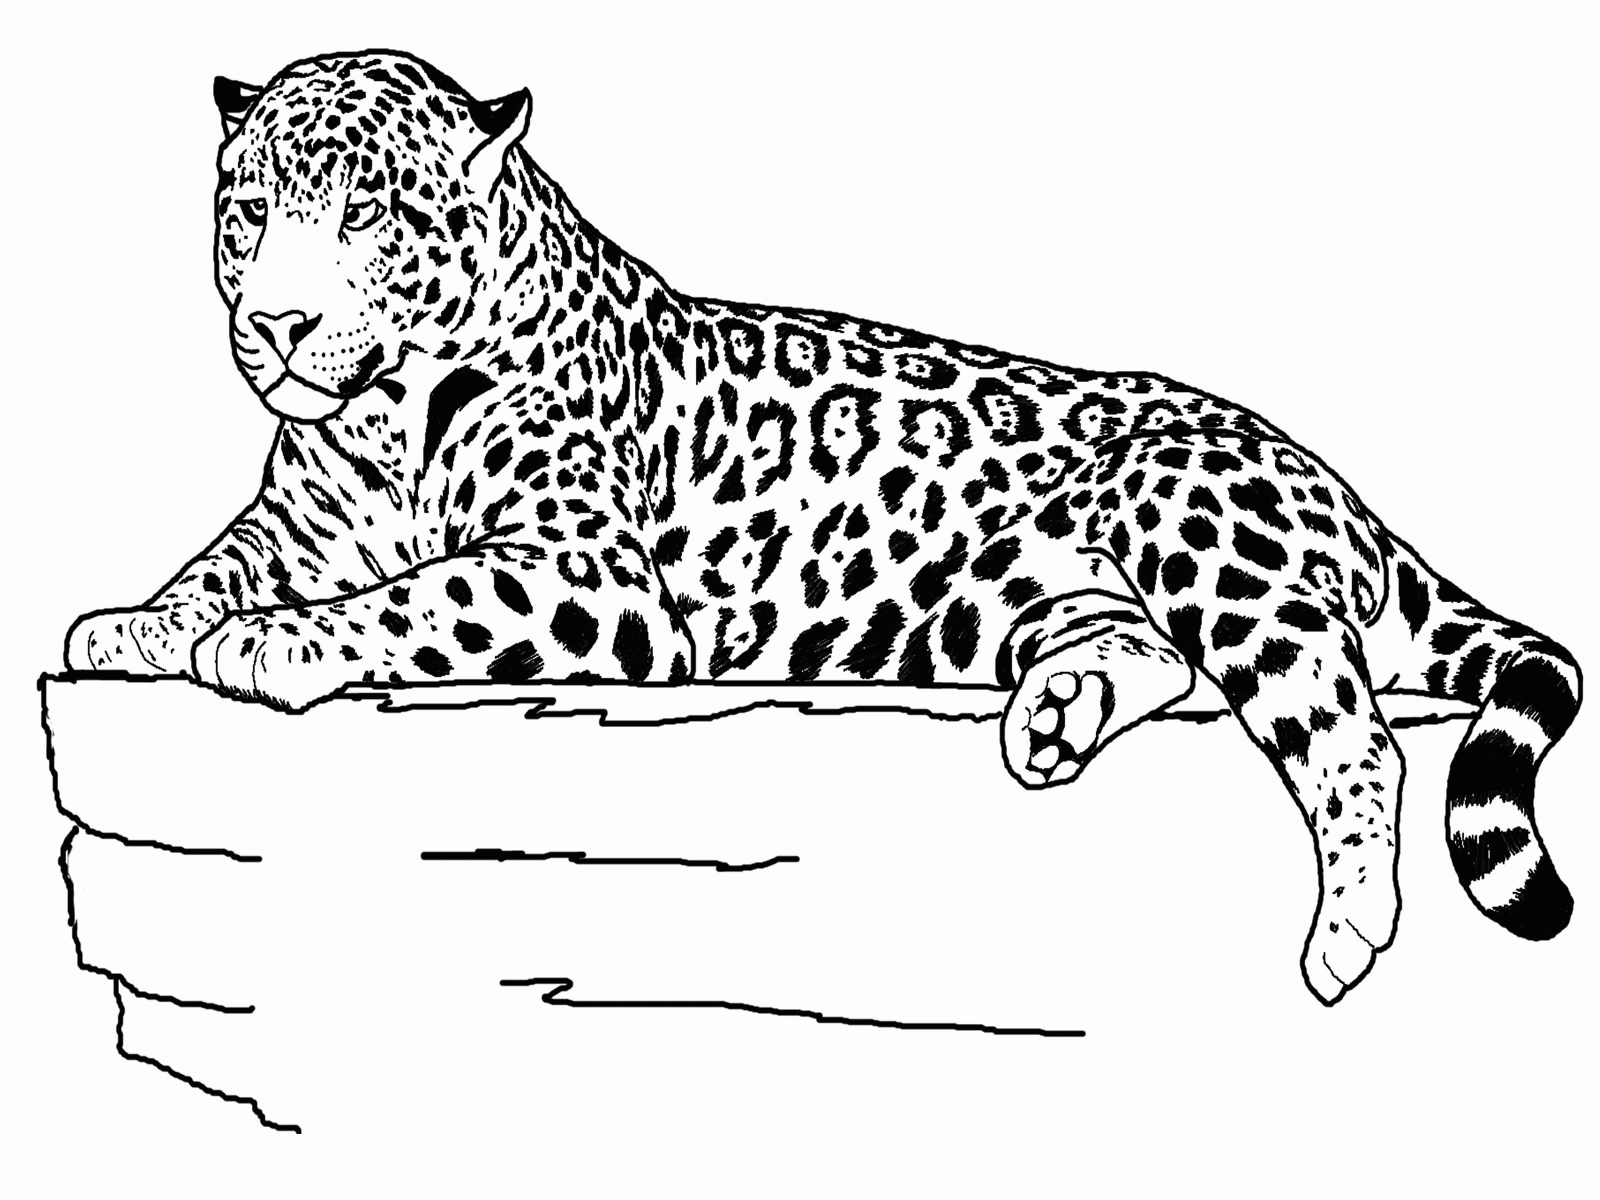 Rainforest Animals Coloring Pages Related Keywords & Suggestions ...